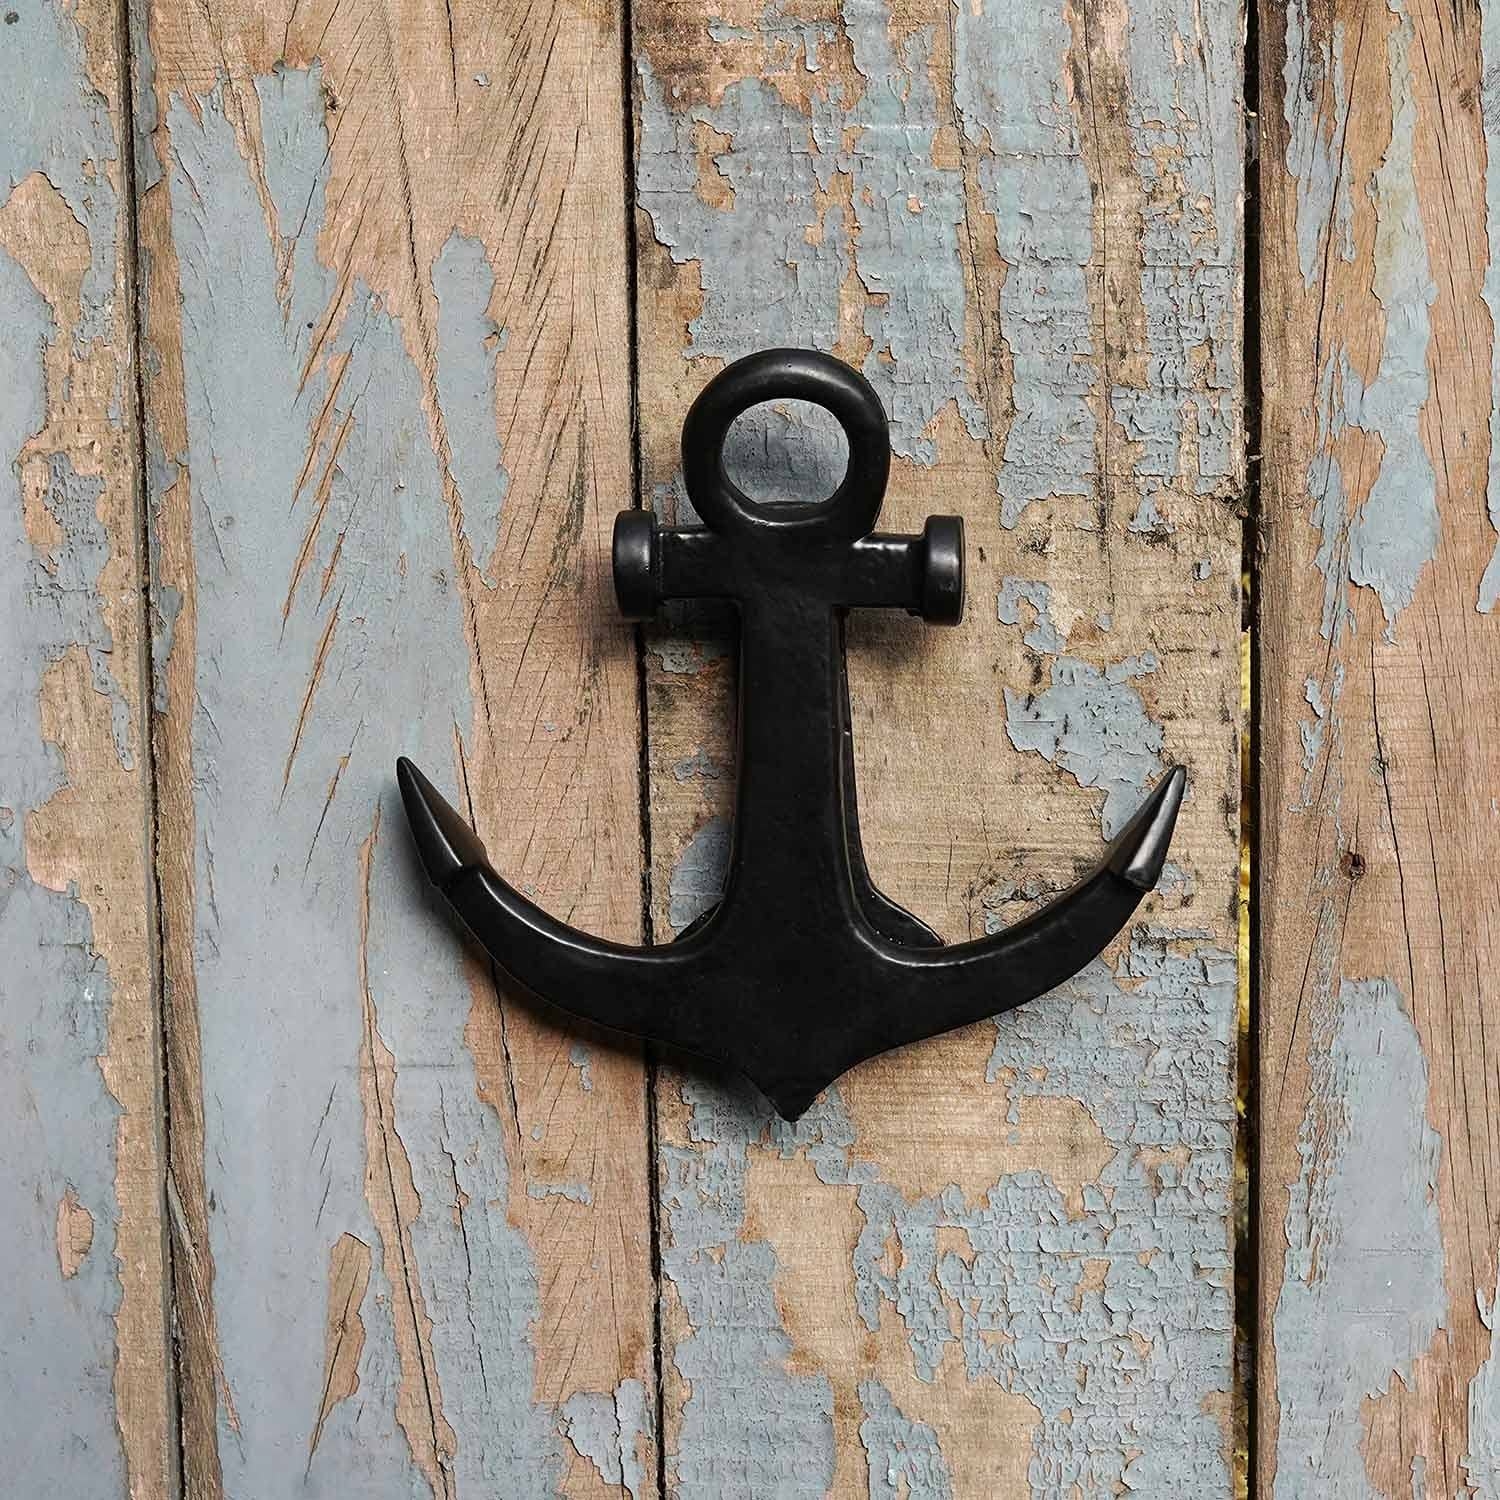 A solid black anchor-shaped door knocker attached to a wooden surface. 